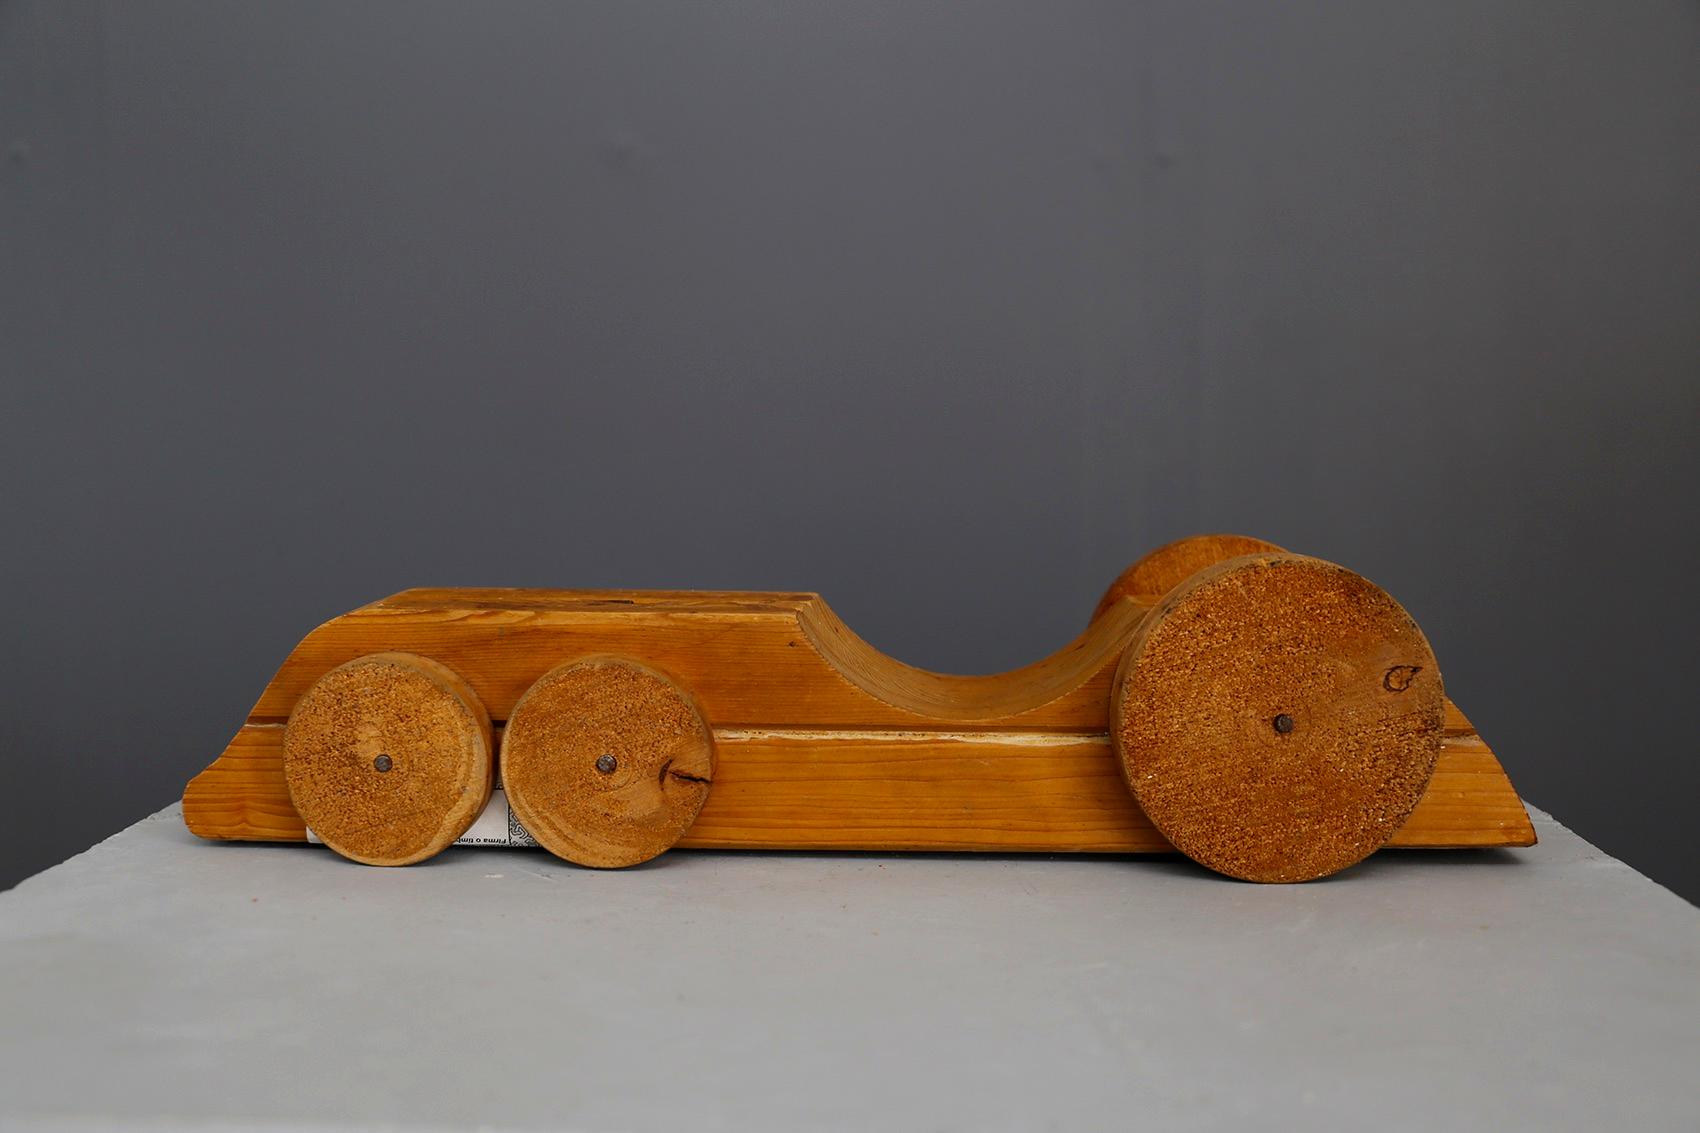 Mid-20th Century Wood Sculpture Futurist Machine by Urano Palma Locomotive title, from 1956 For Sale